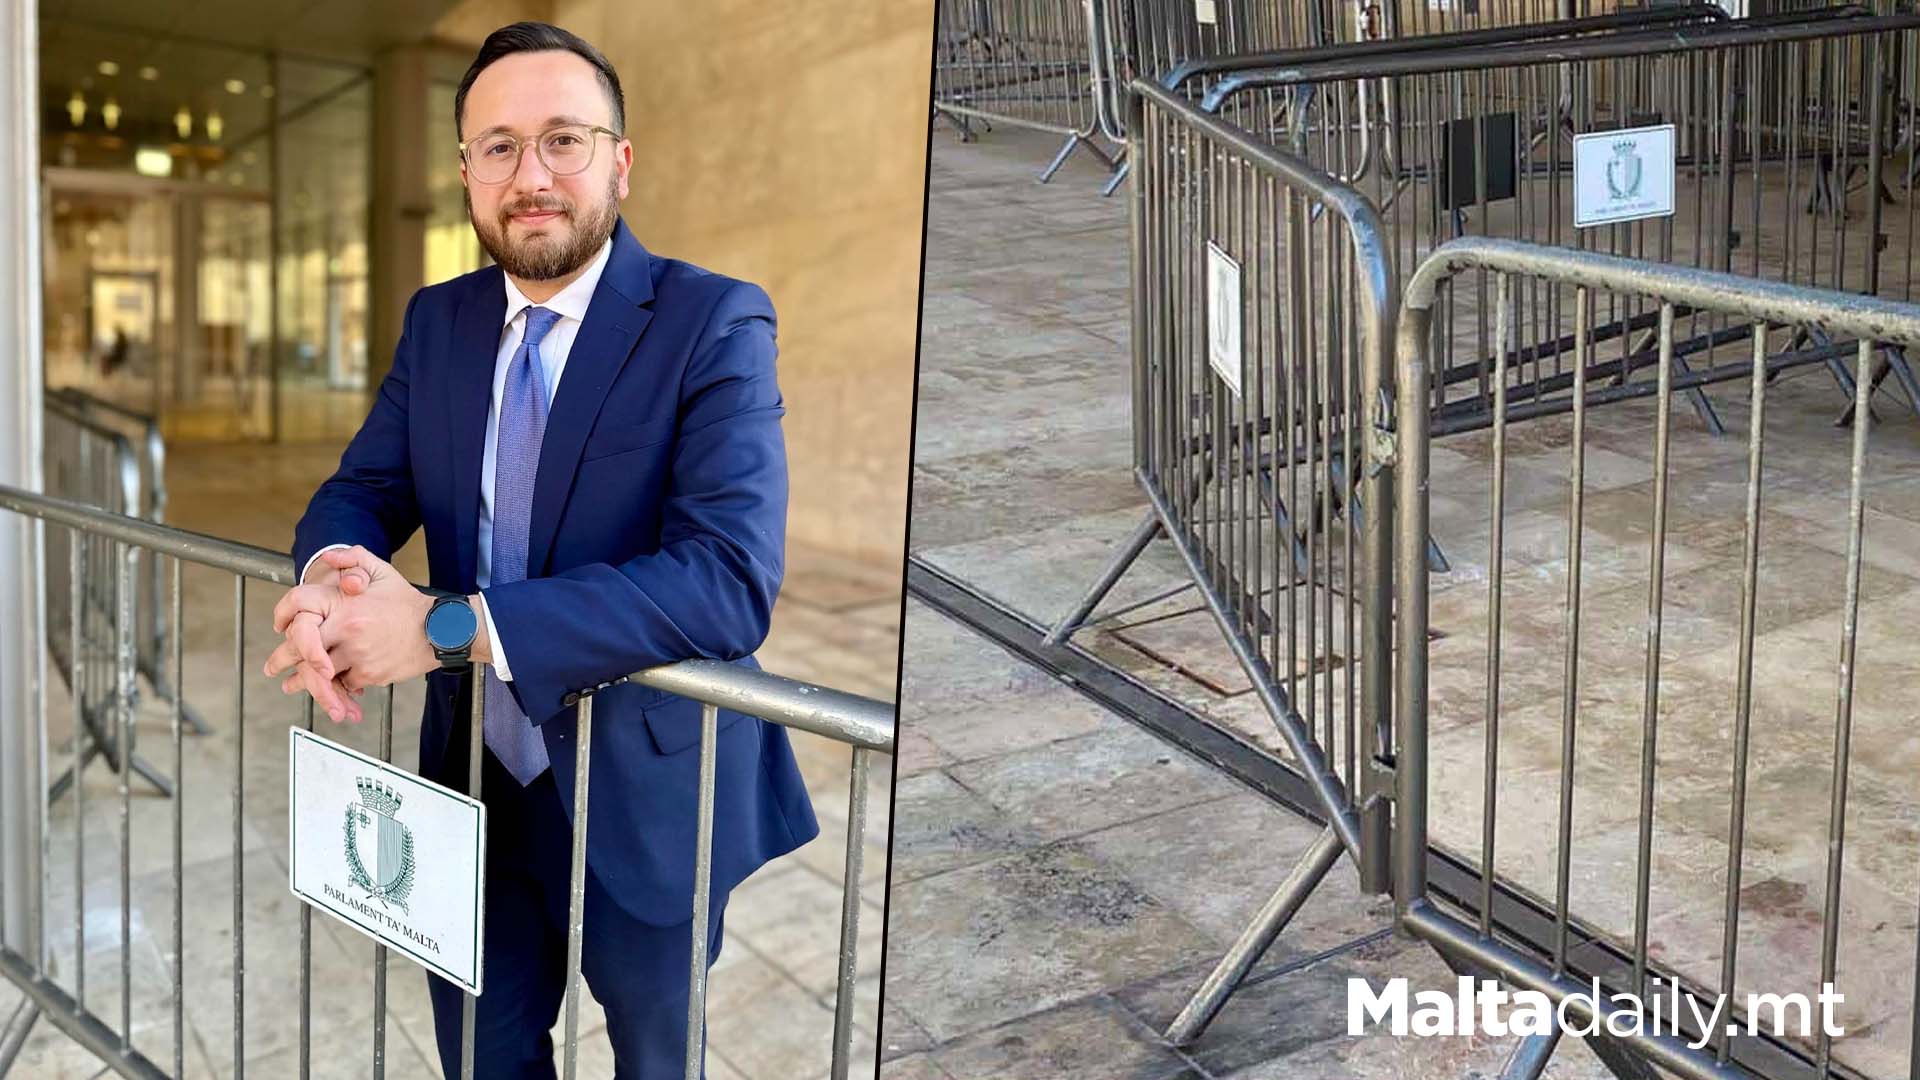 PN MP Reiterates Call To Remove Parliament Barriers